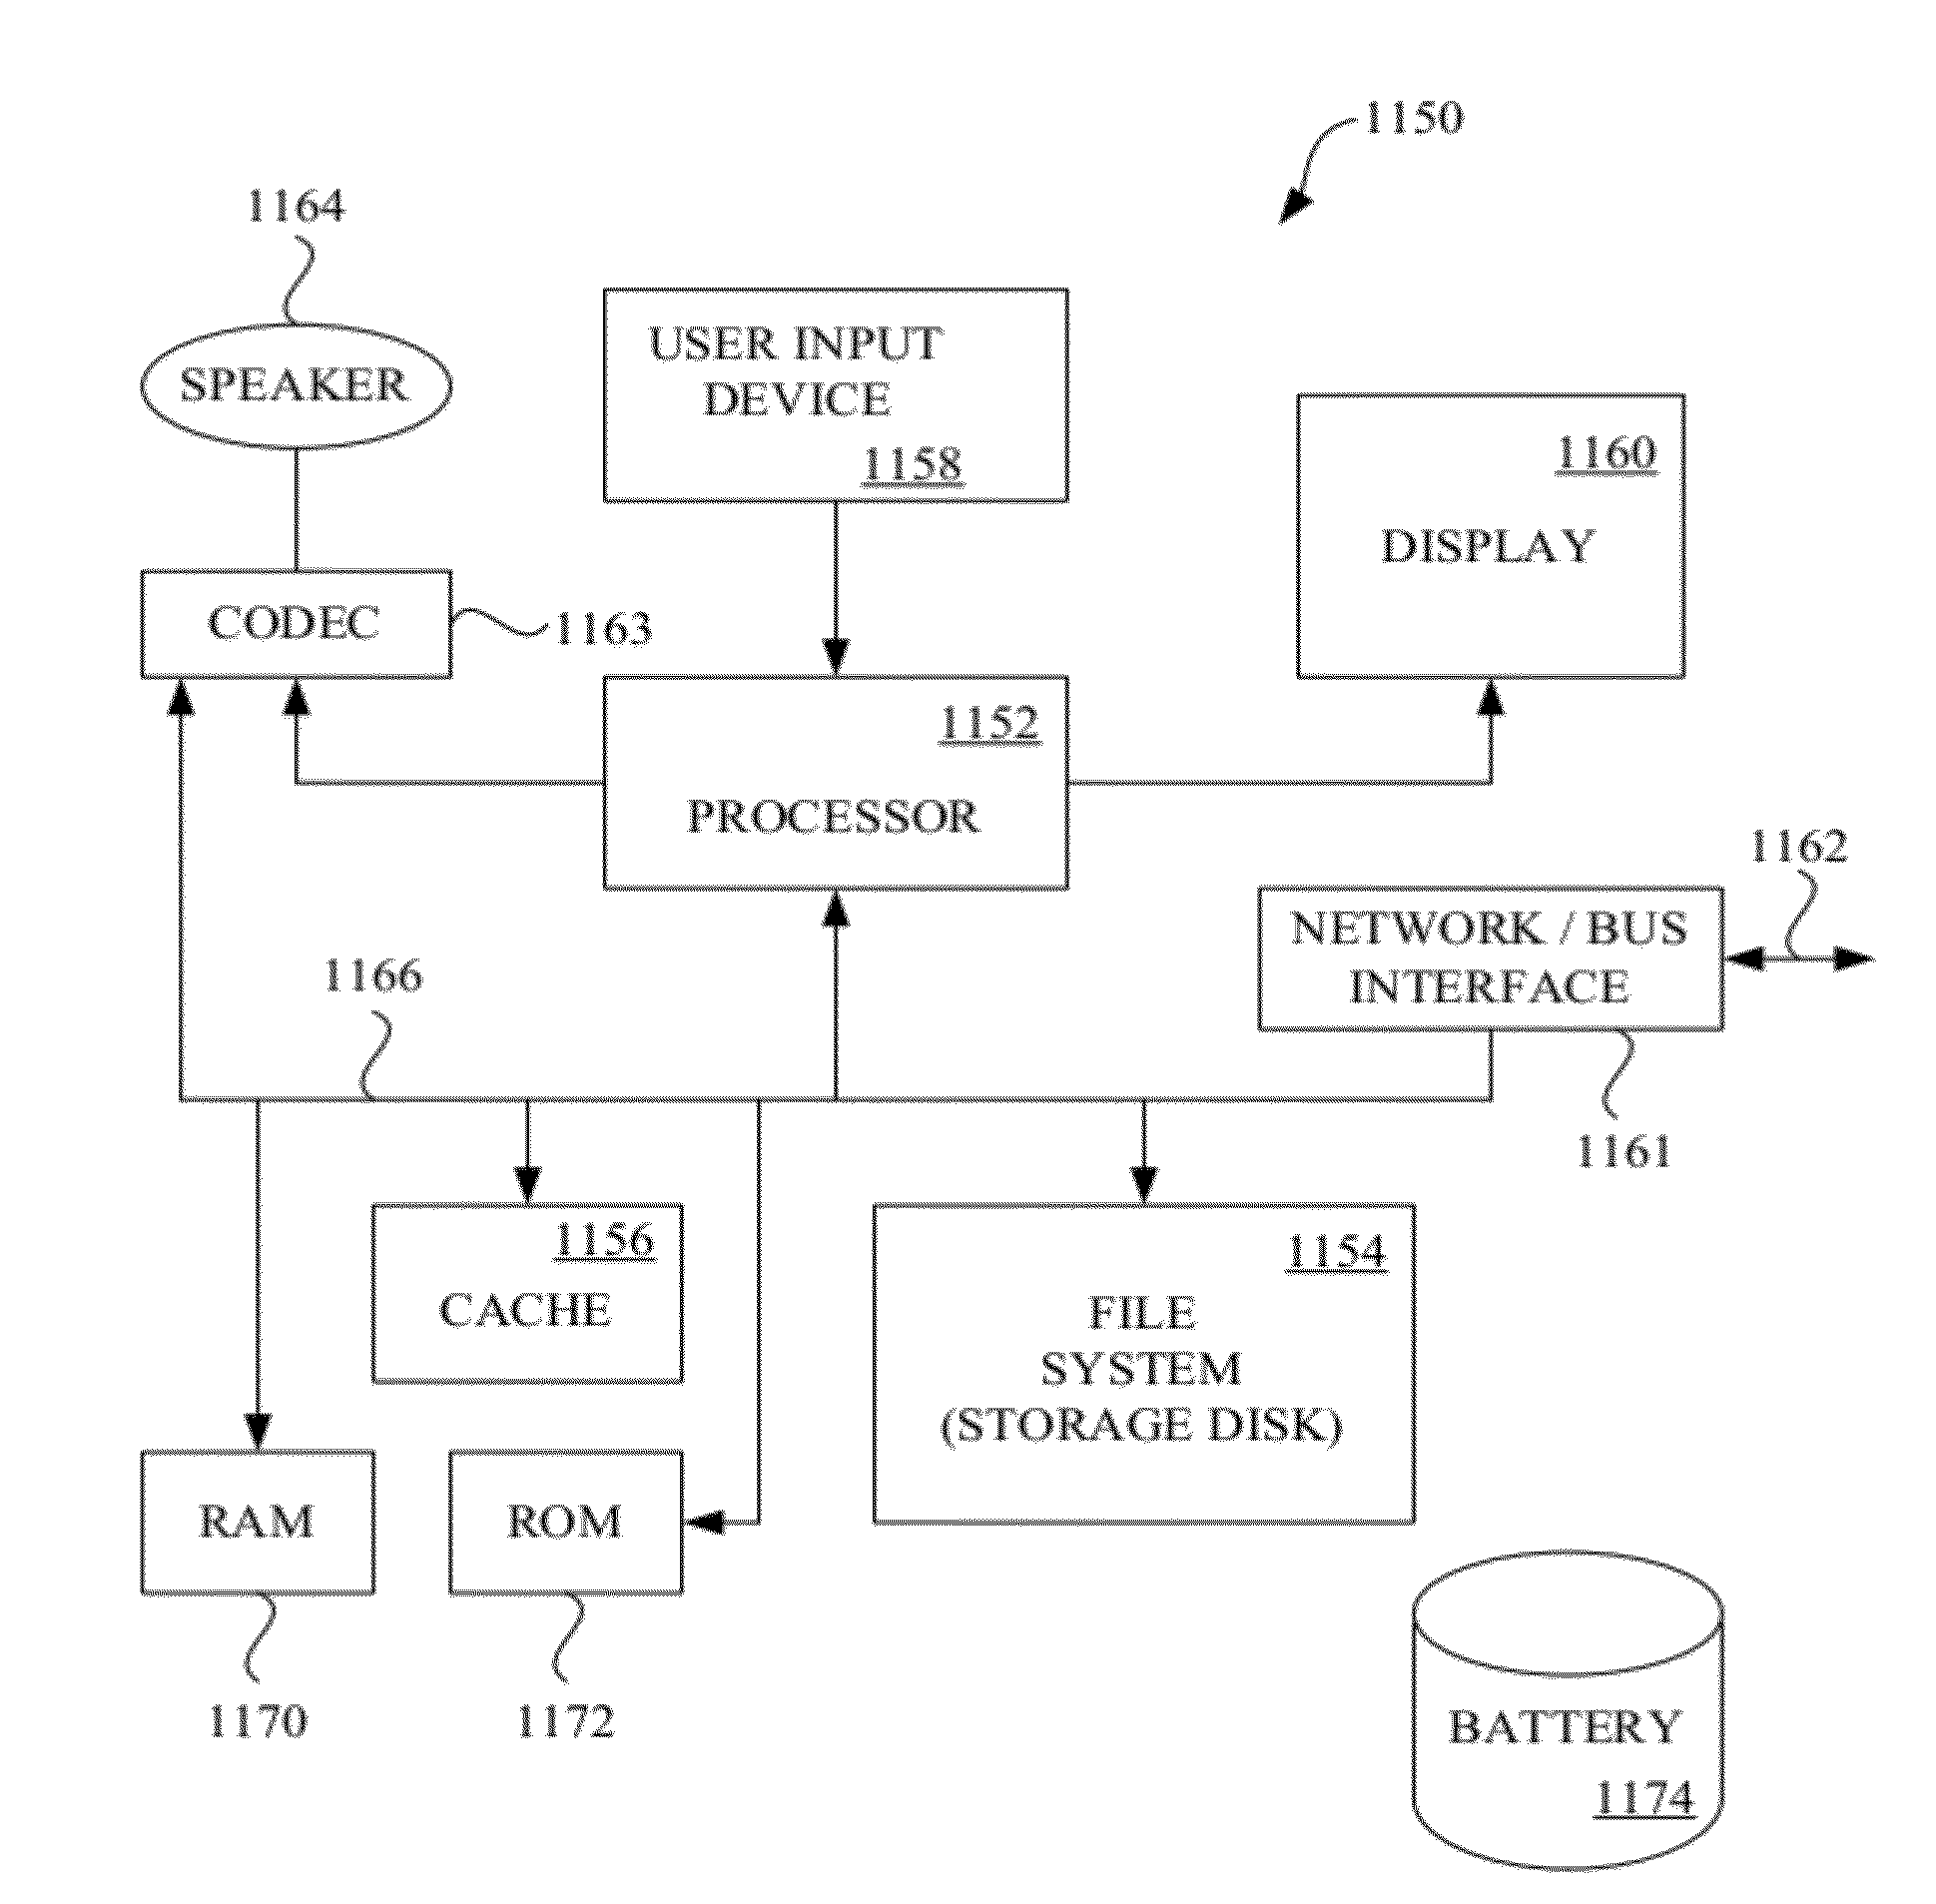 Porting audio using a connector in a small form factor electronic device